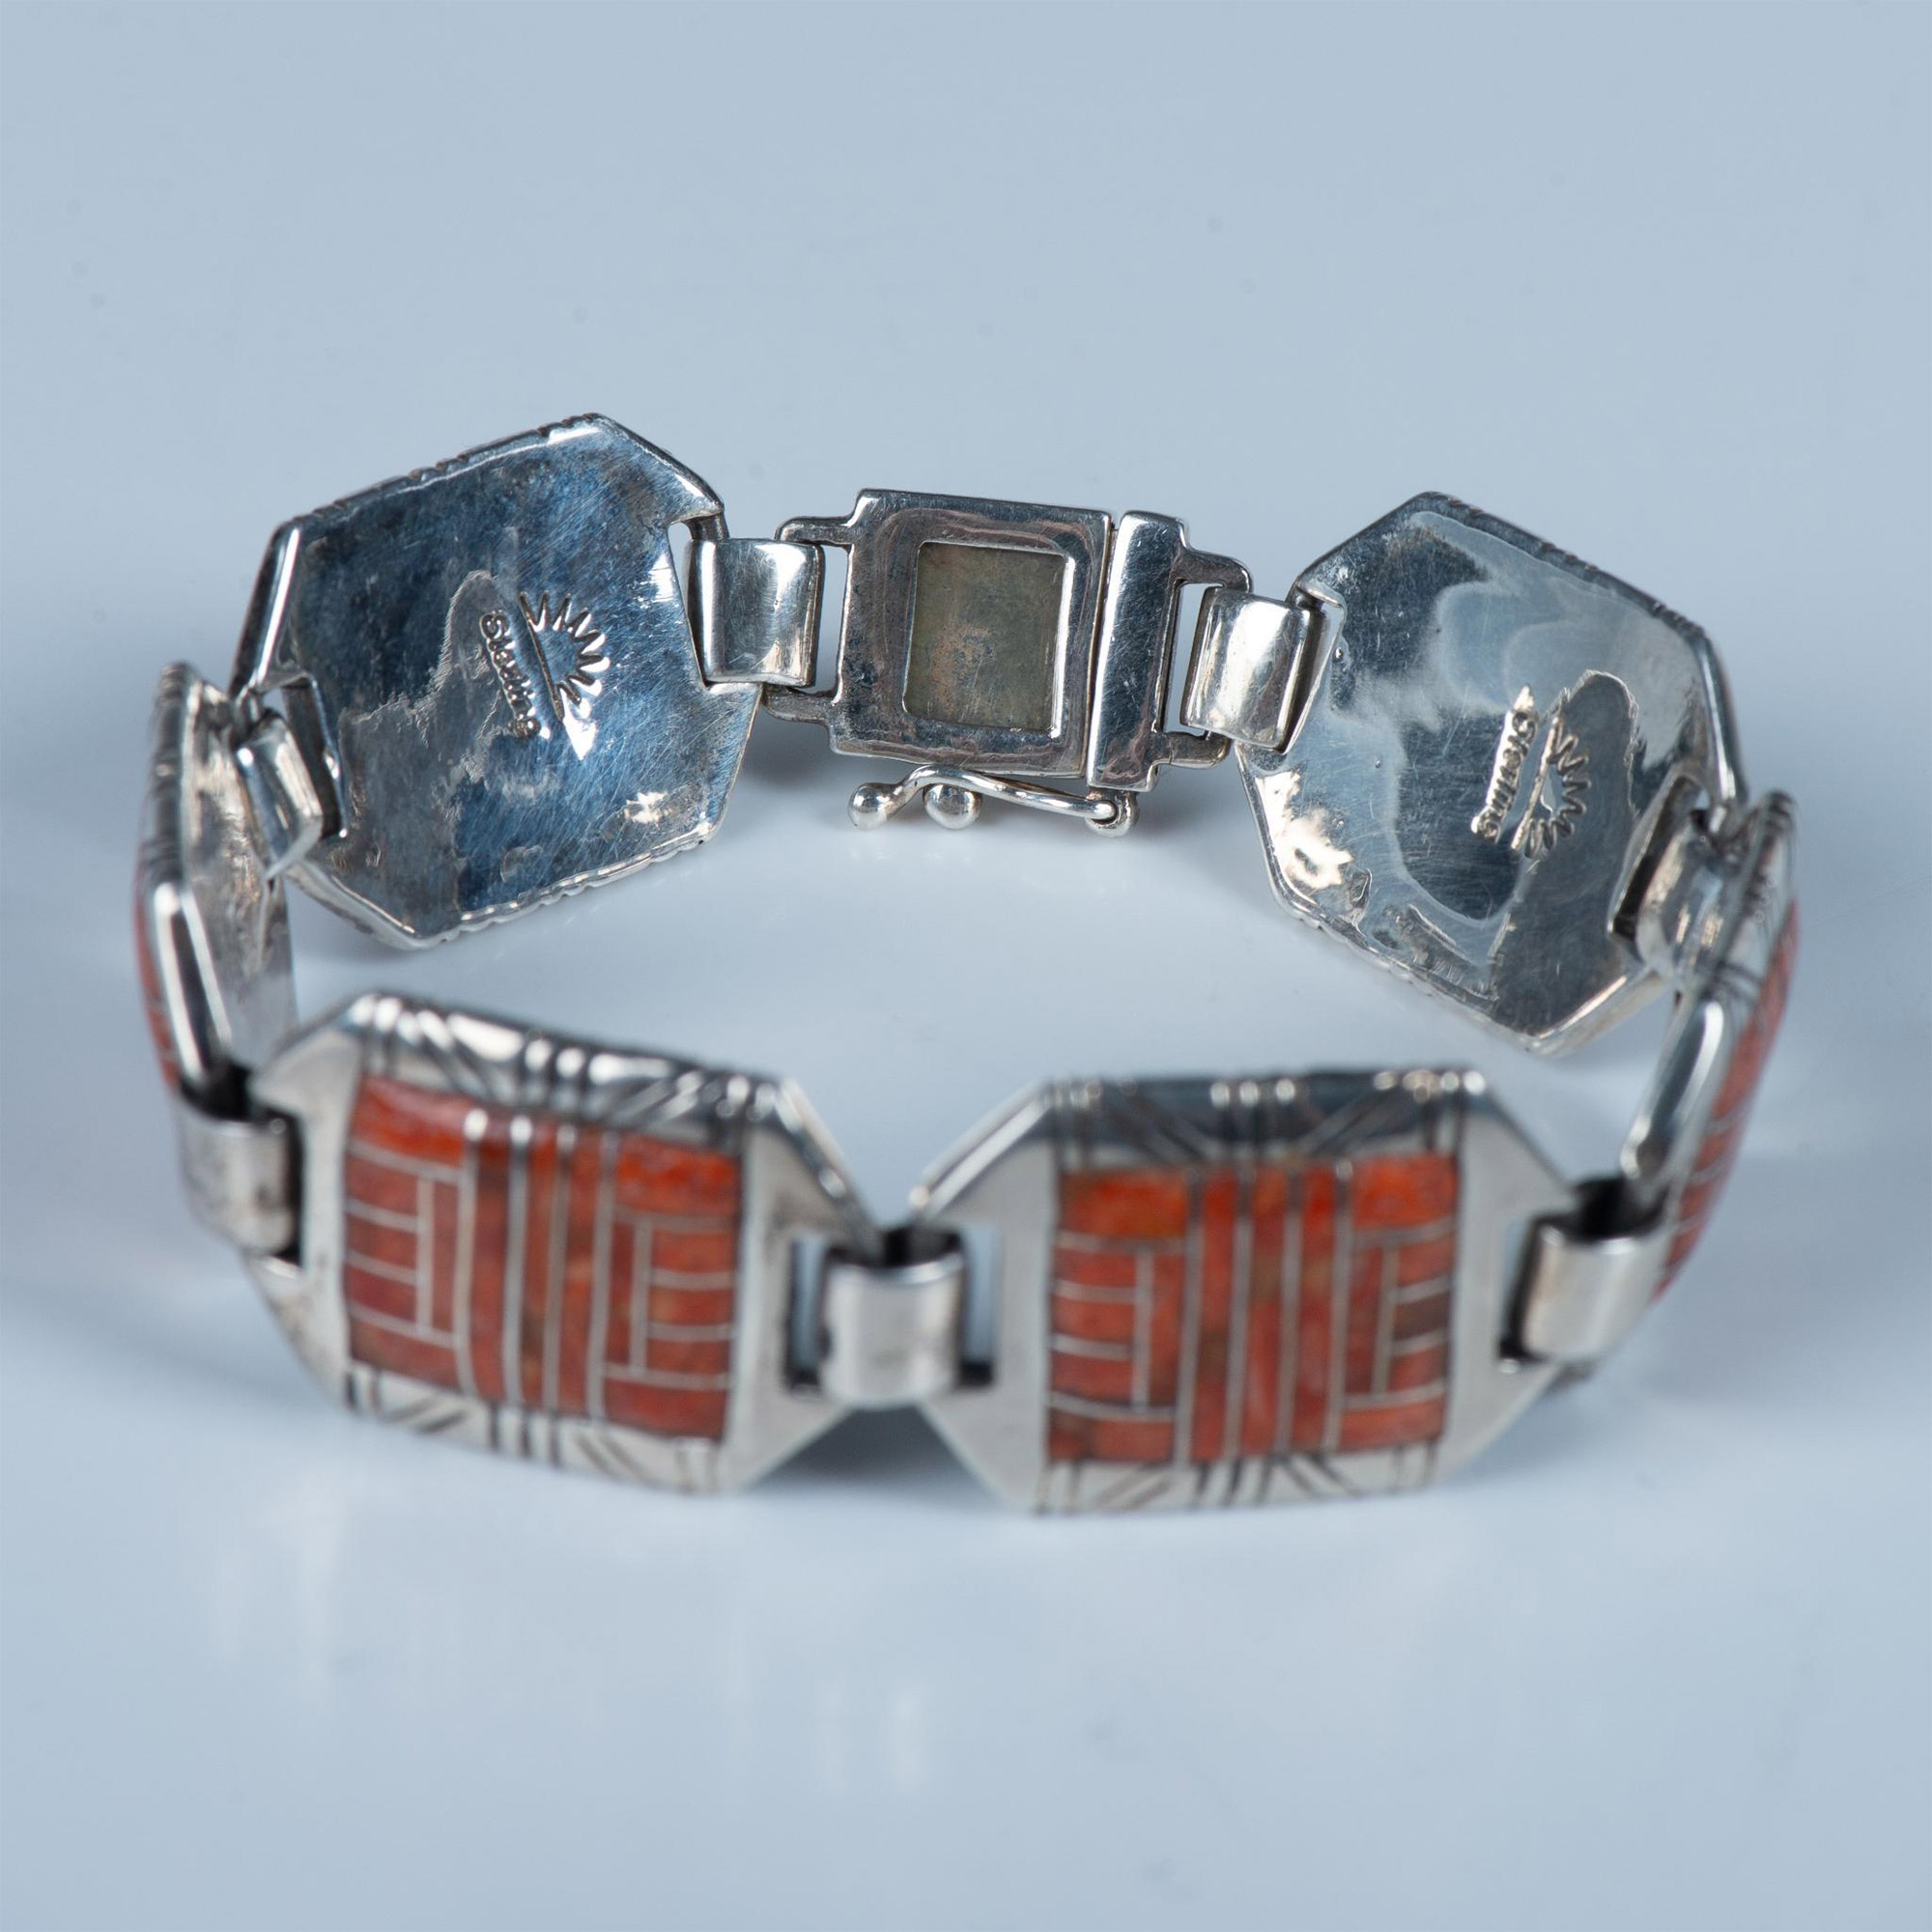 Zuni Contemporary Sterling Silver & Coral Inlay Bracelet - Image 5 of 5